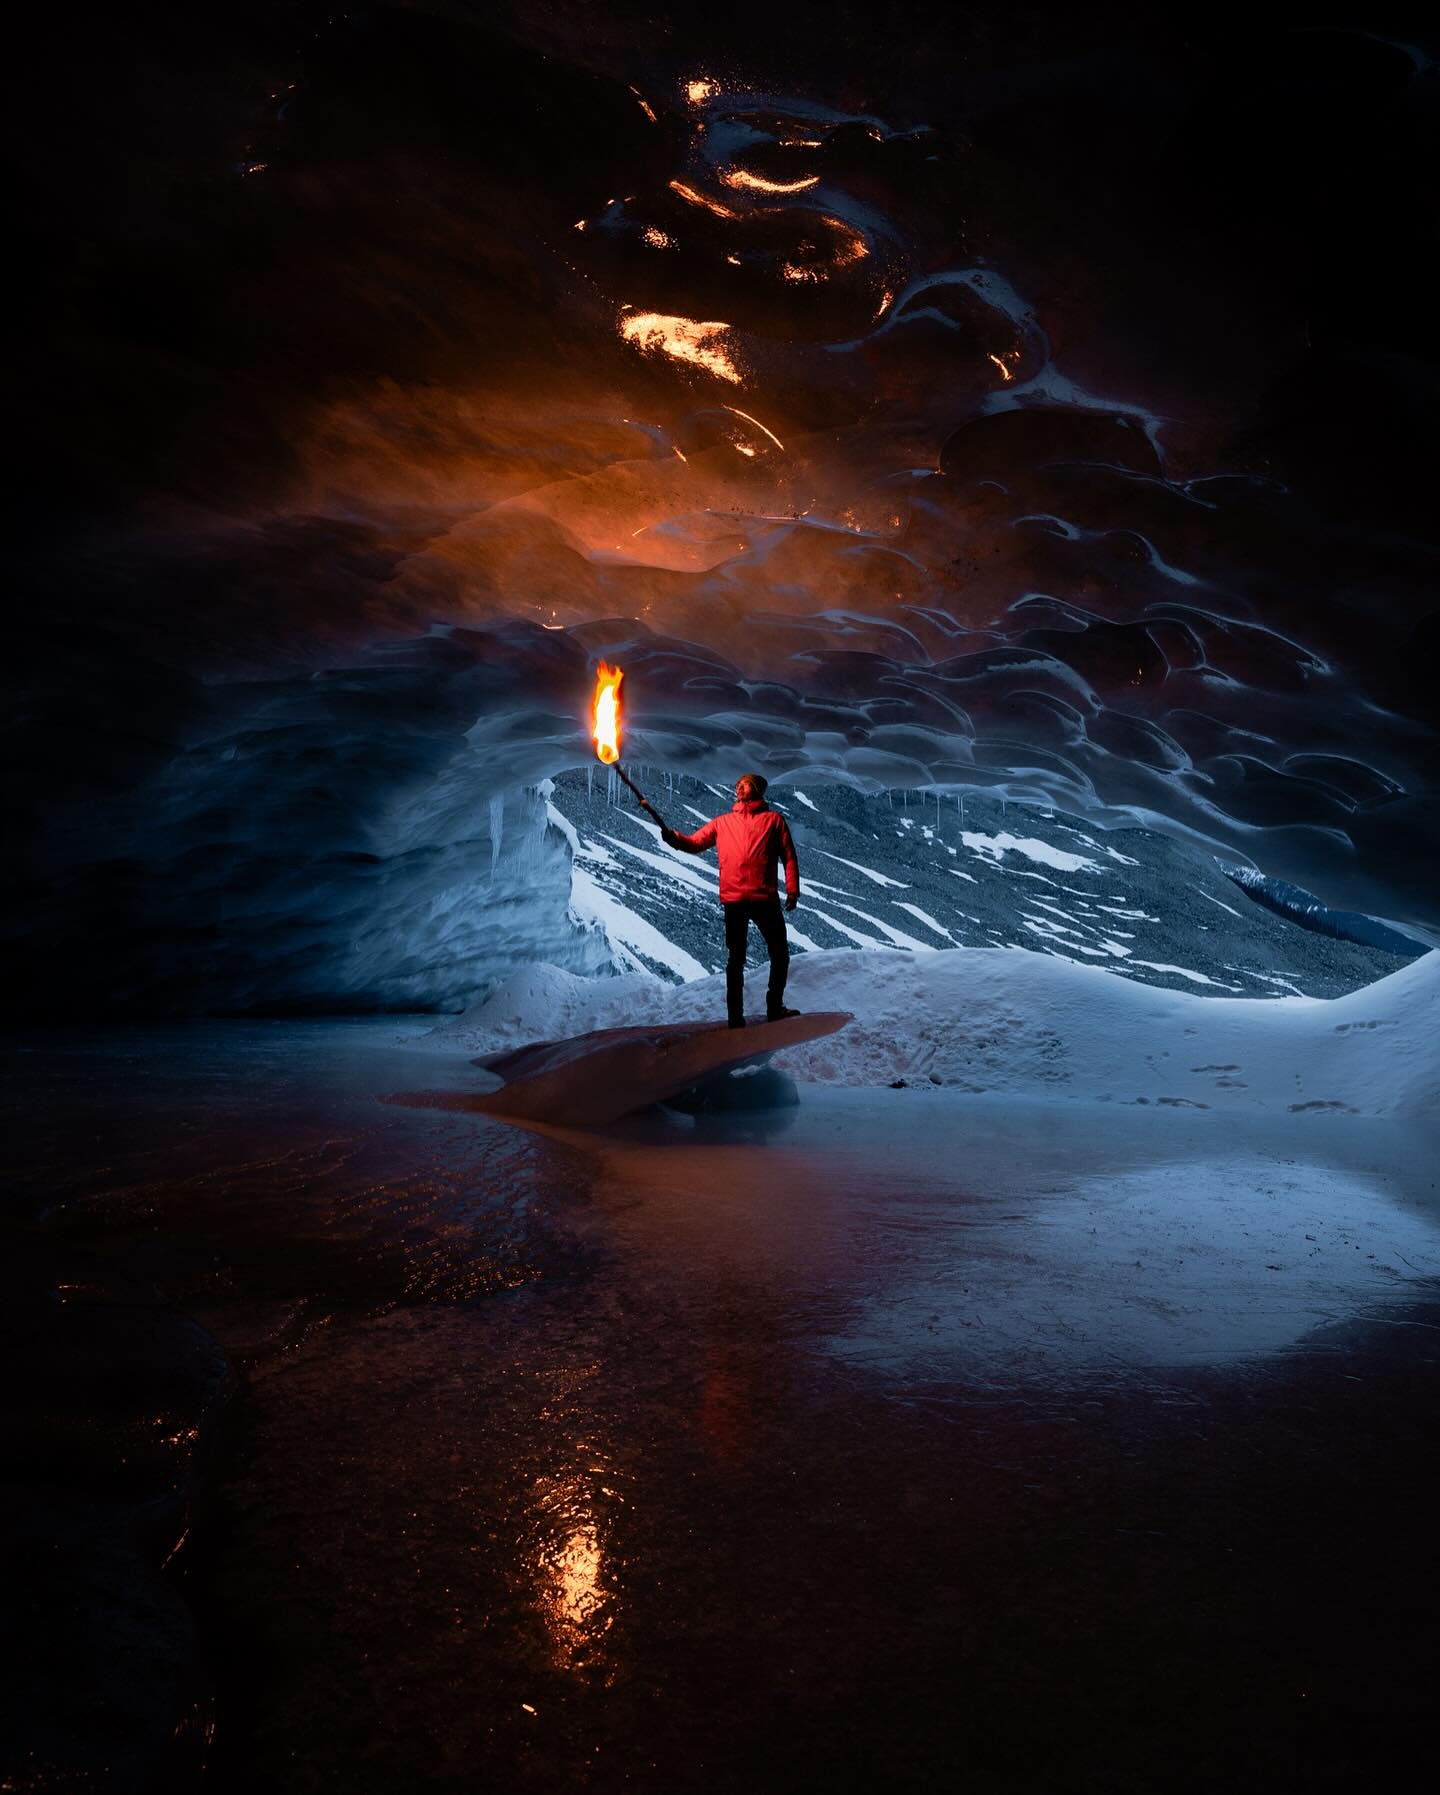 Exploring the frozen depths of time in the Canadian Rockies. It&rsquo;s wild to think that each twist and turn of this ice has been sculpted by nature over thousands of years. @_antonhugo and I spent an afternoon shooting his video project here. A cr